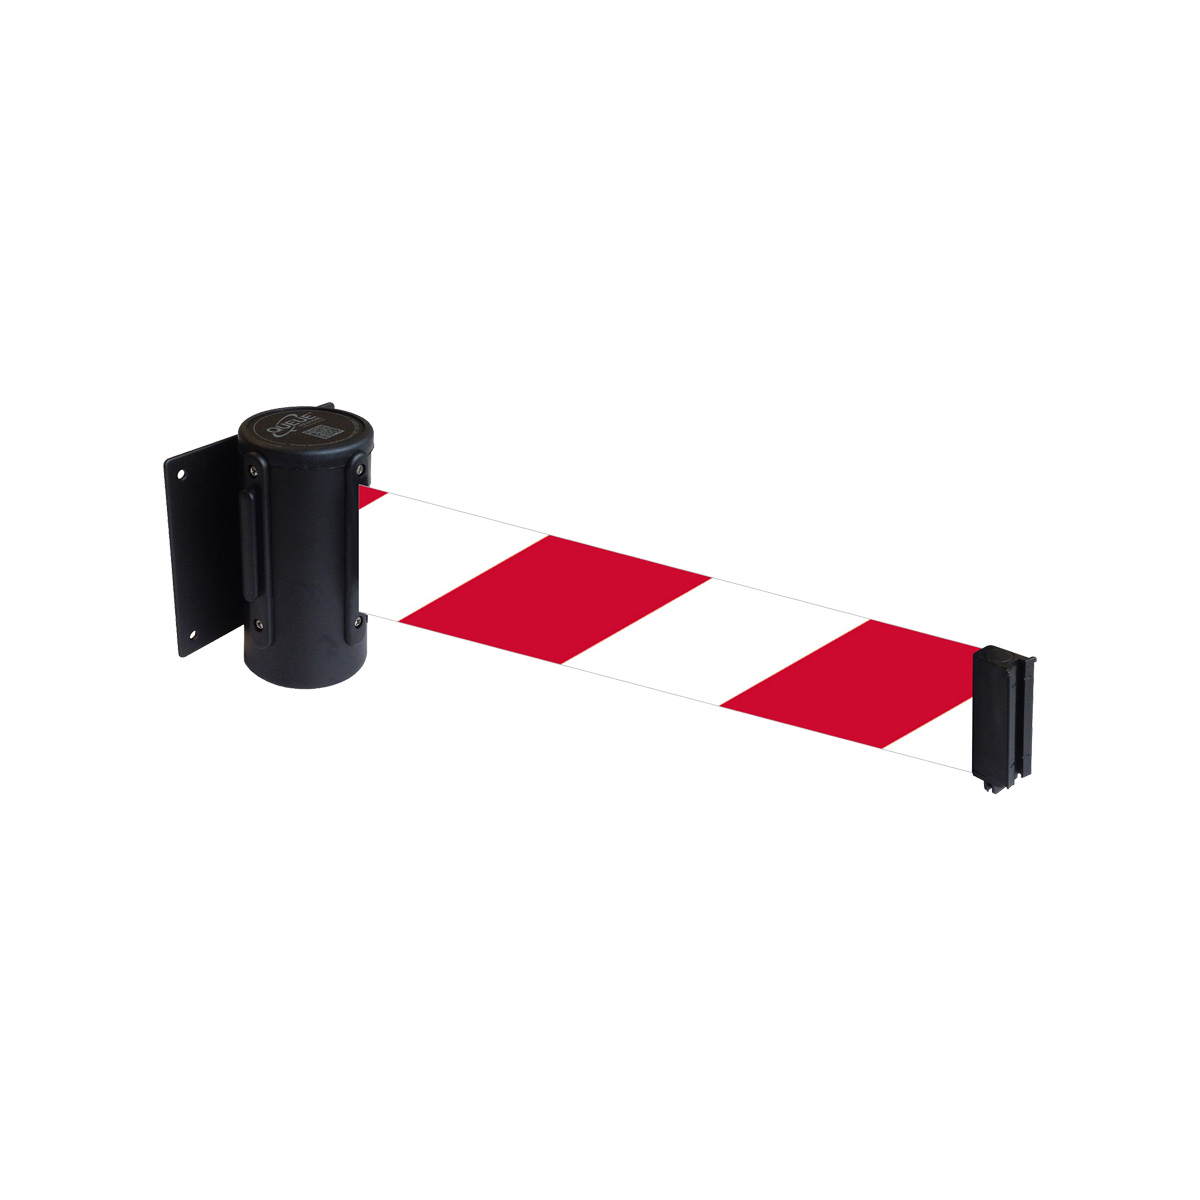 WallMaster Wall Mounted Retractable Barriers Black ABS Cassette With Red & White Chevron Tape